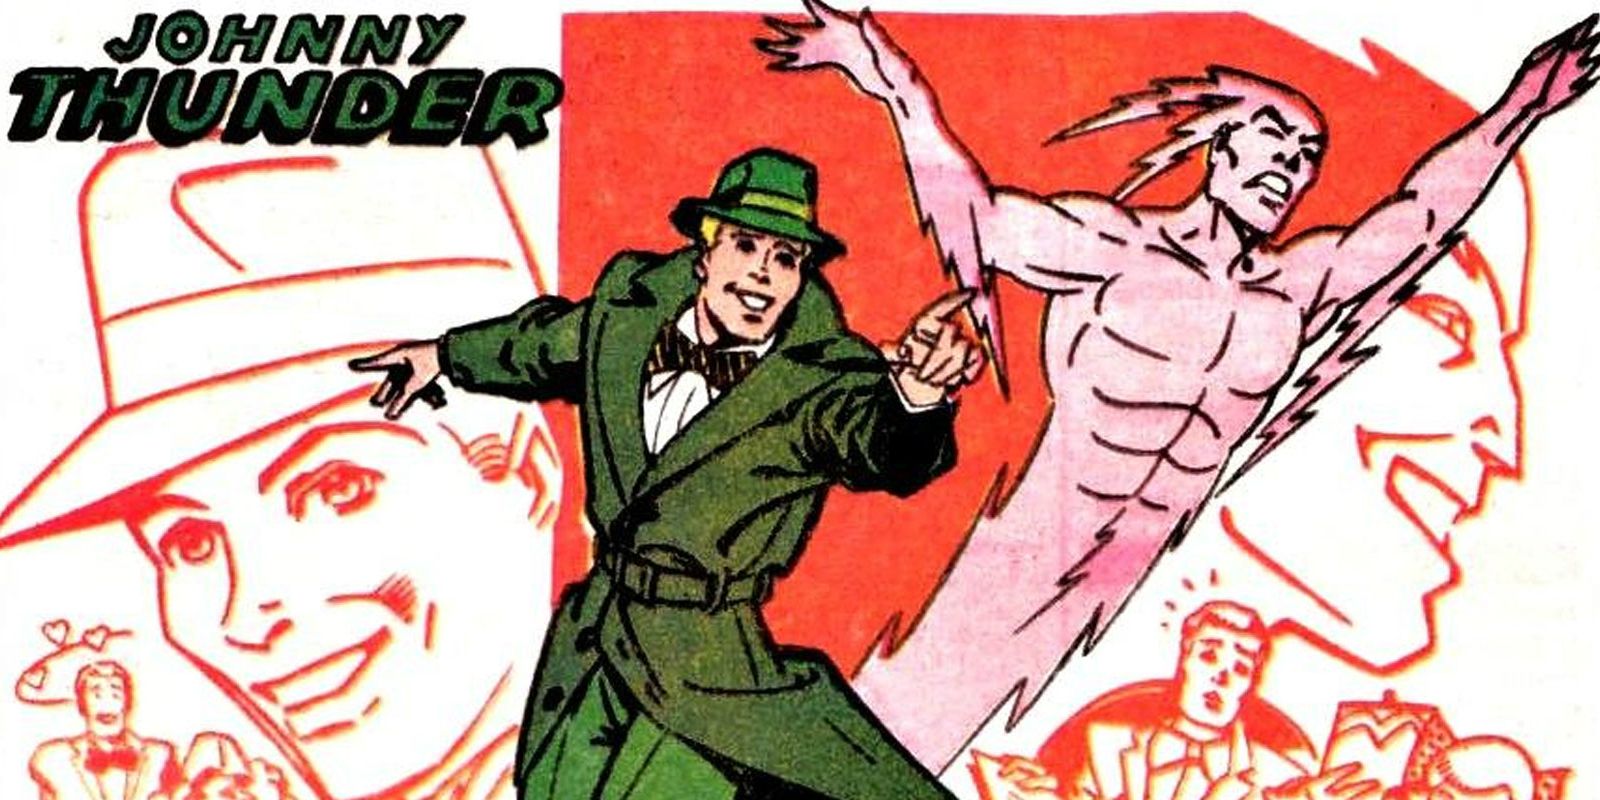 Johnny Thunder during the Golden Age of DC Comics